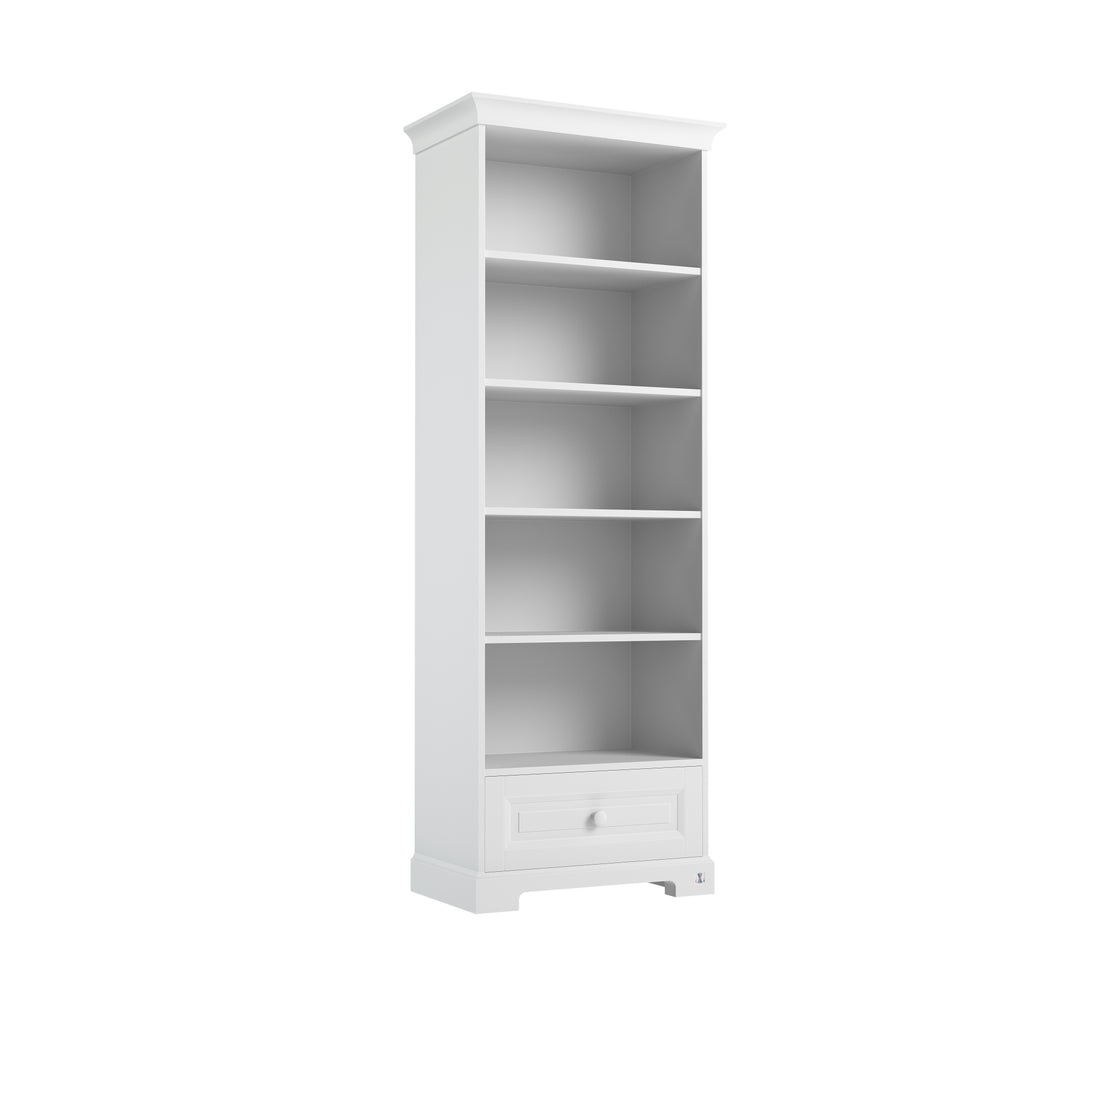 Bookcase ROYAL with drawer in classic design | Bookcase for baby room | Bookcase 205cm | White bookcase children room